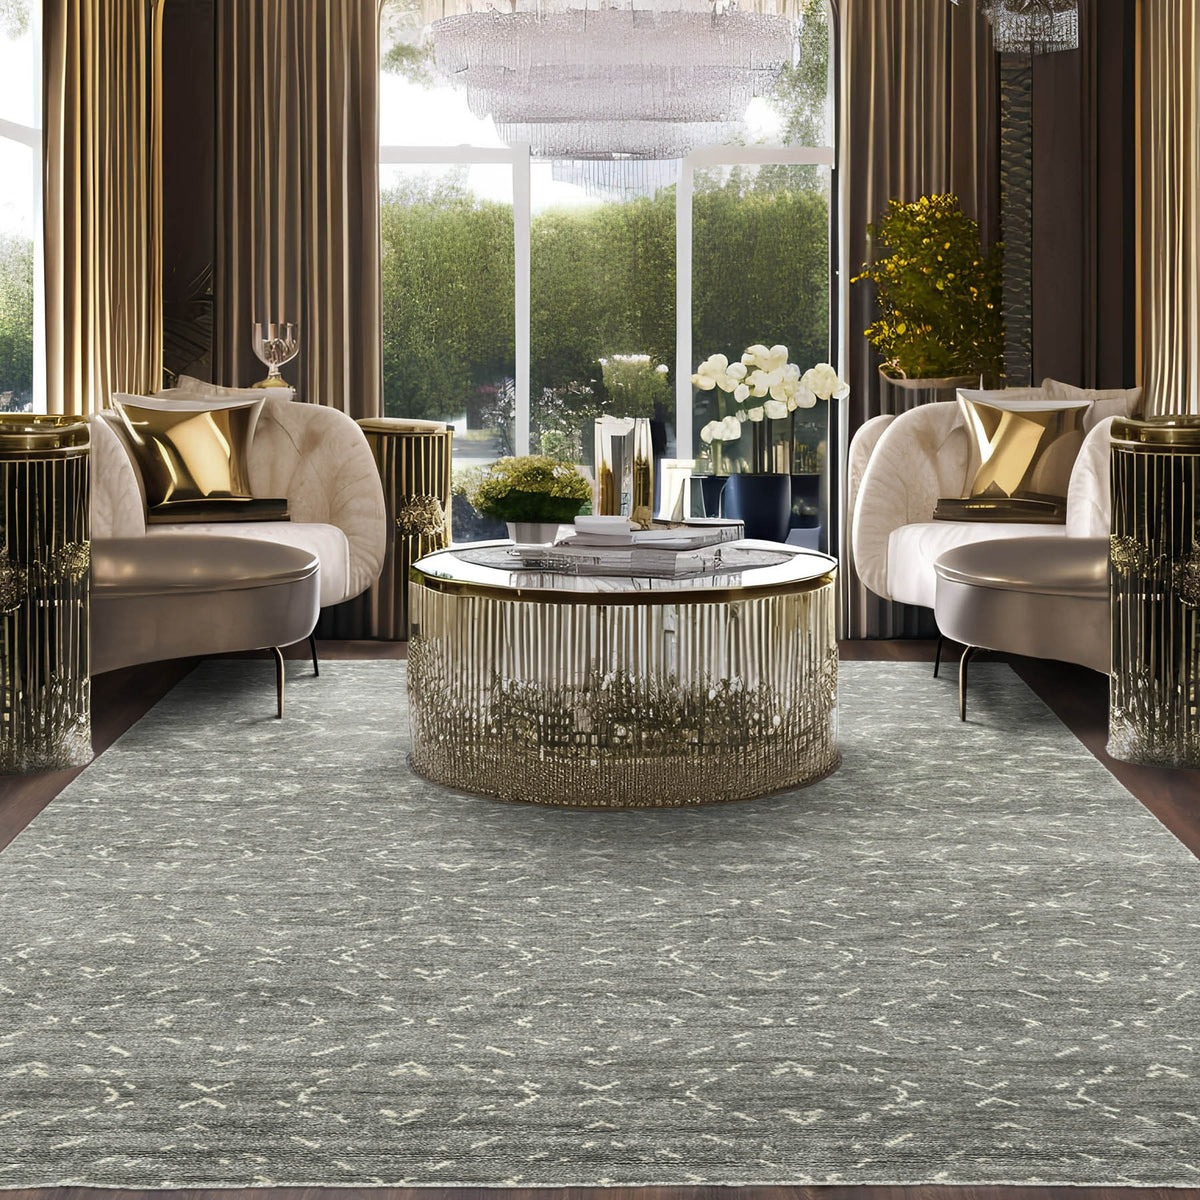 Equatore 9x12 Gray LoomBloom Hand Knotted Transitional All-Over Oushak 100% Wool Oriental Area Rug